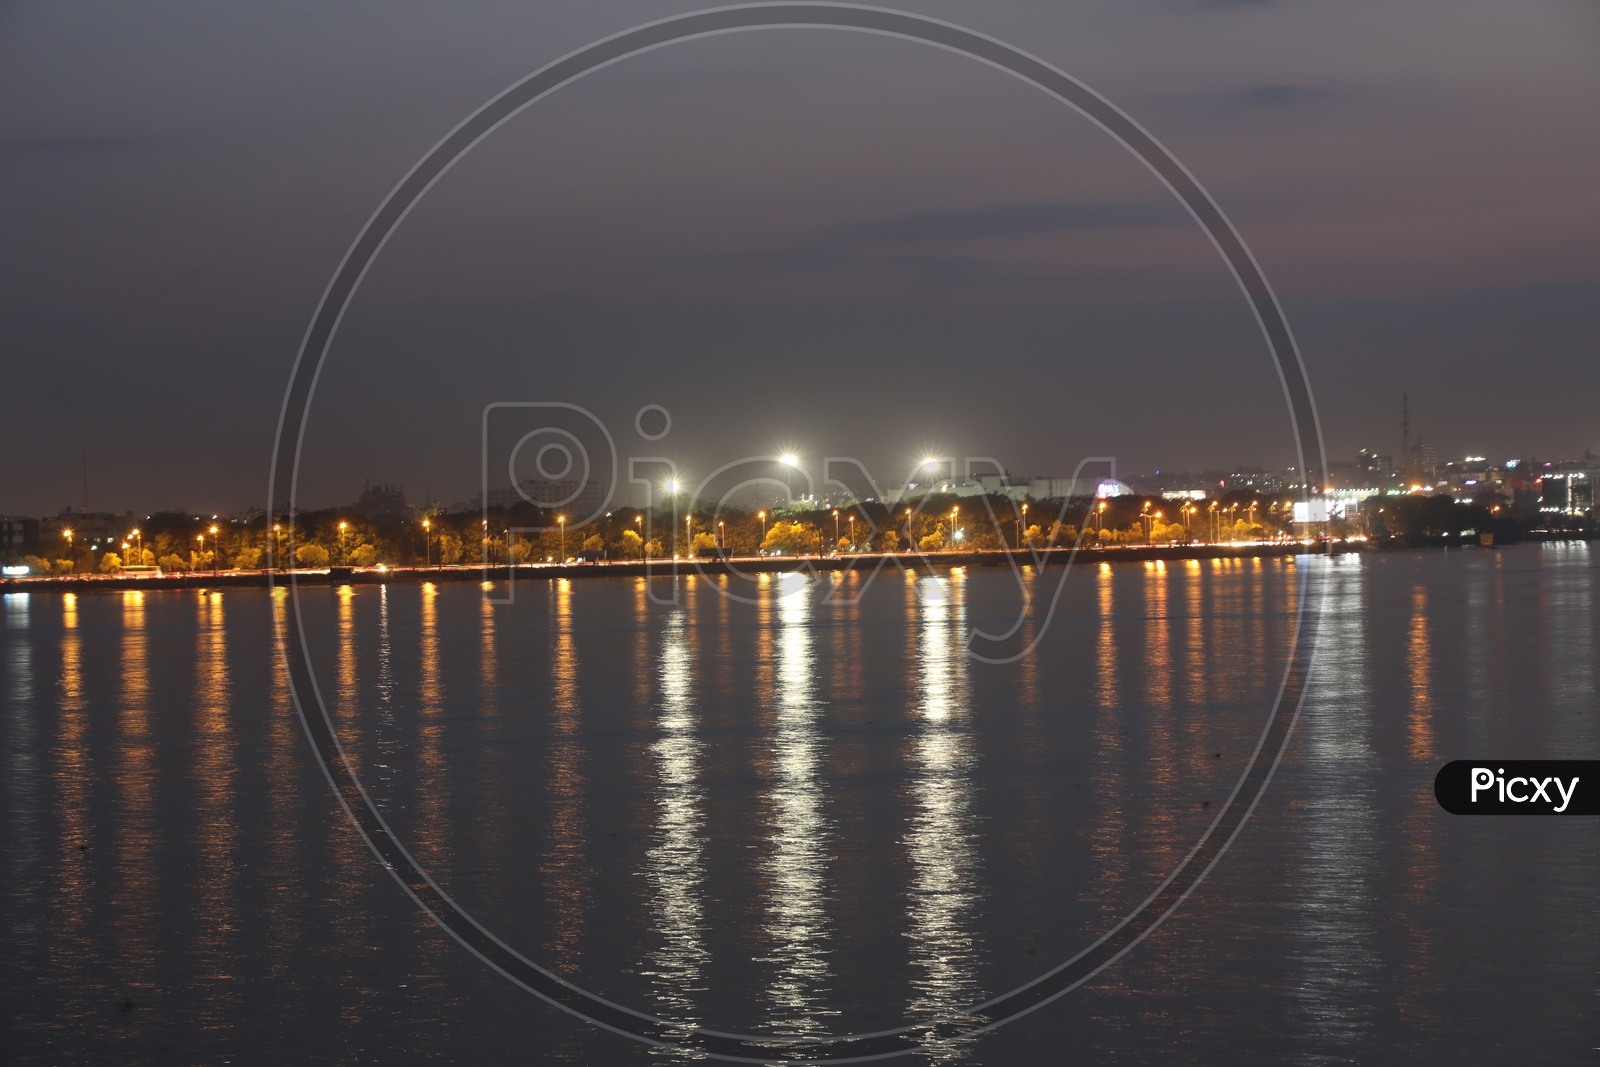 Hussain Sagar Buddha Statue With The reflection of Street Lights on Water Surface